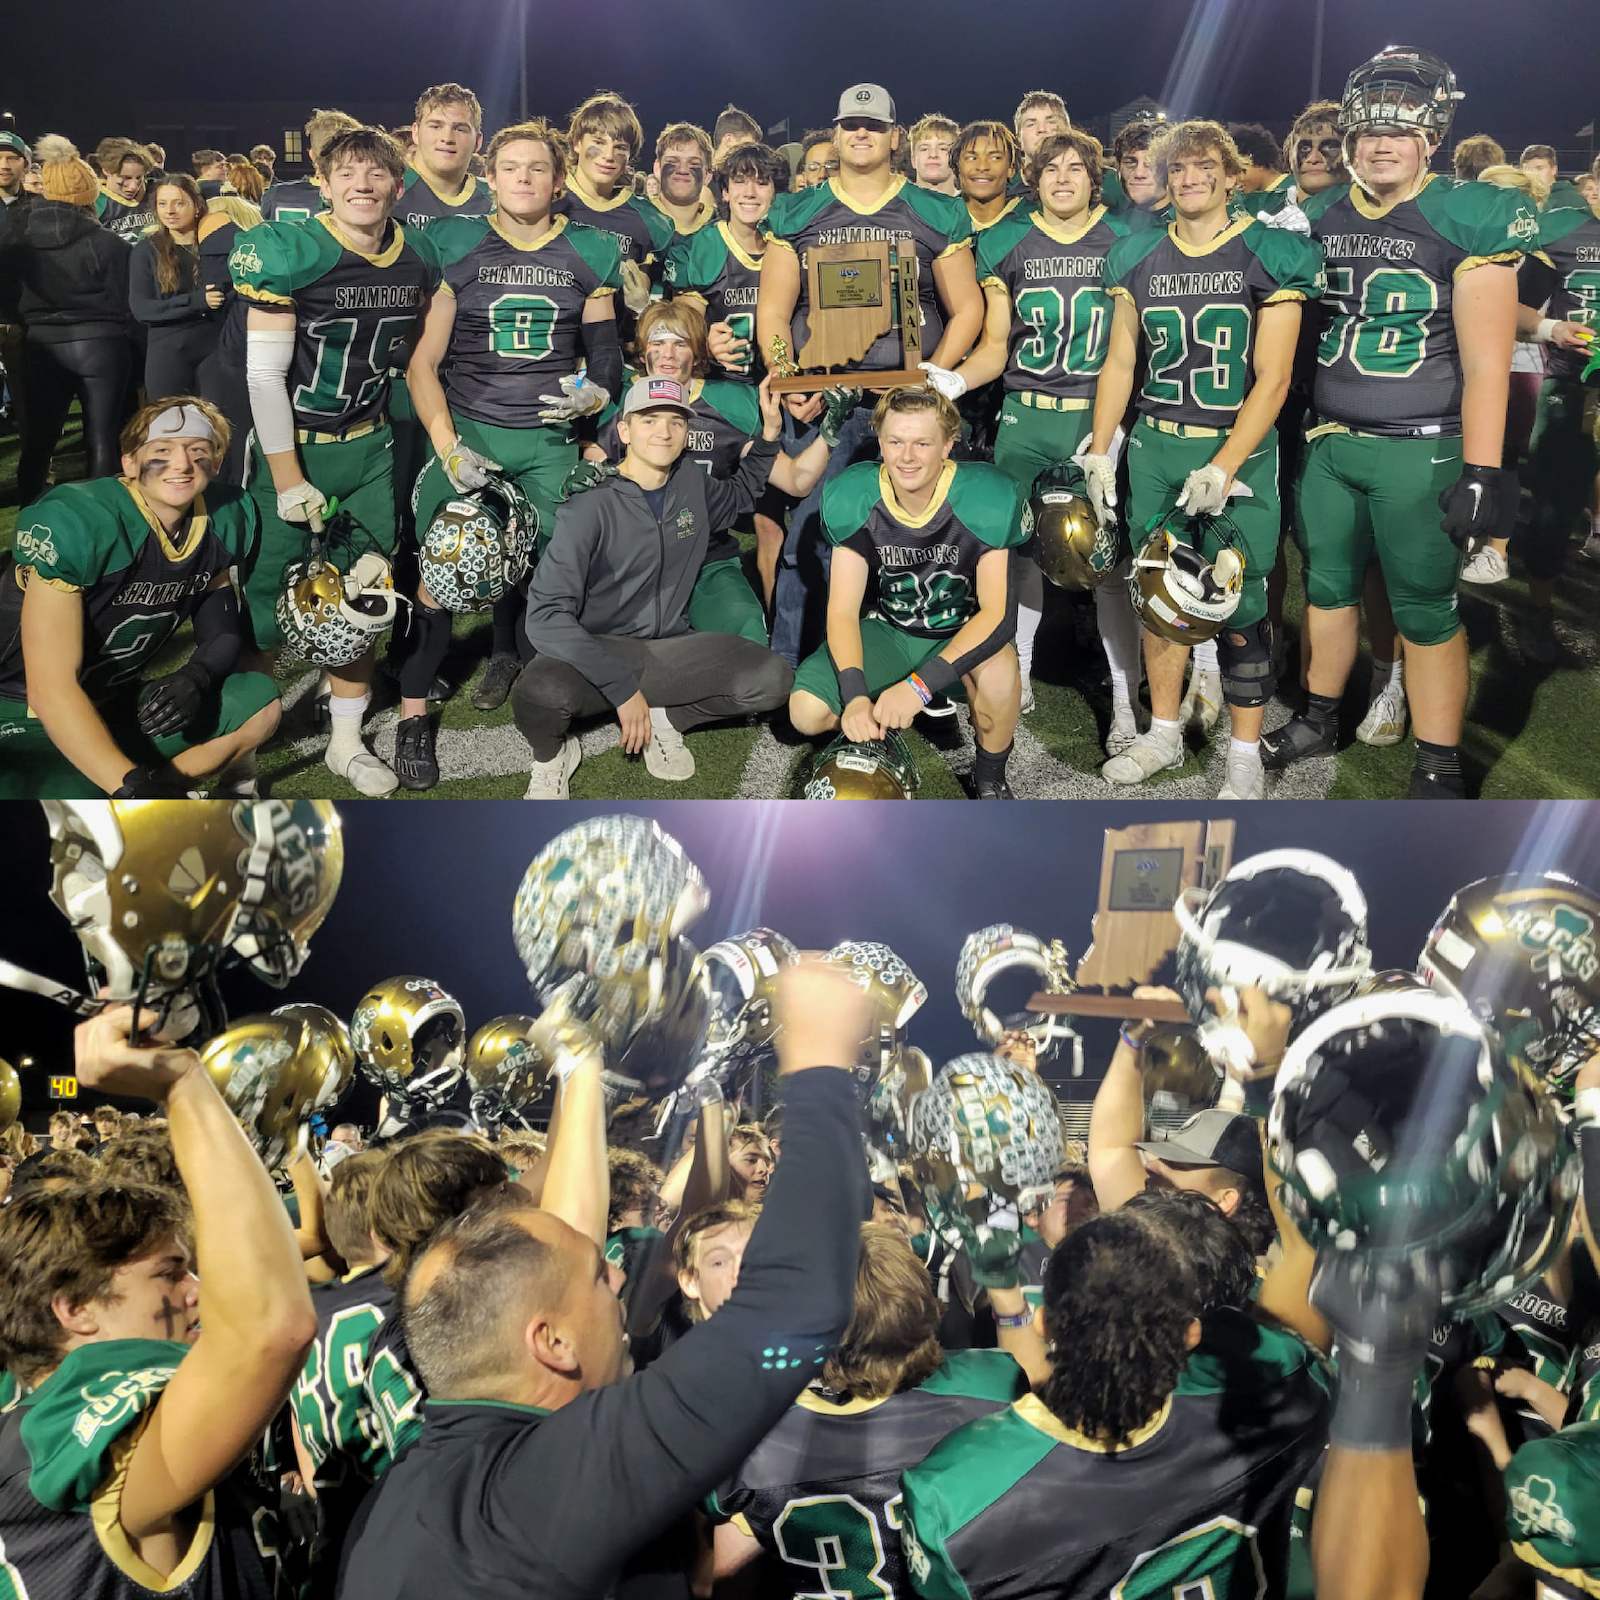 Rocks Claim Sectional 4 Championship Over Millers cover photo